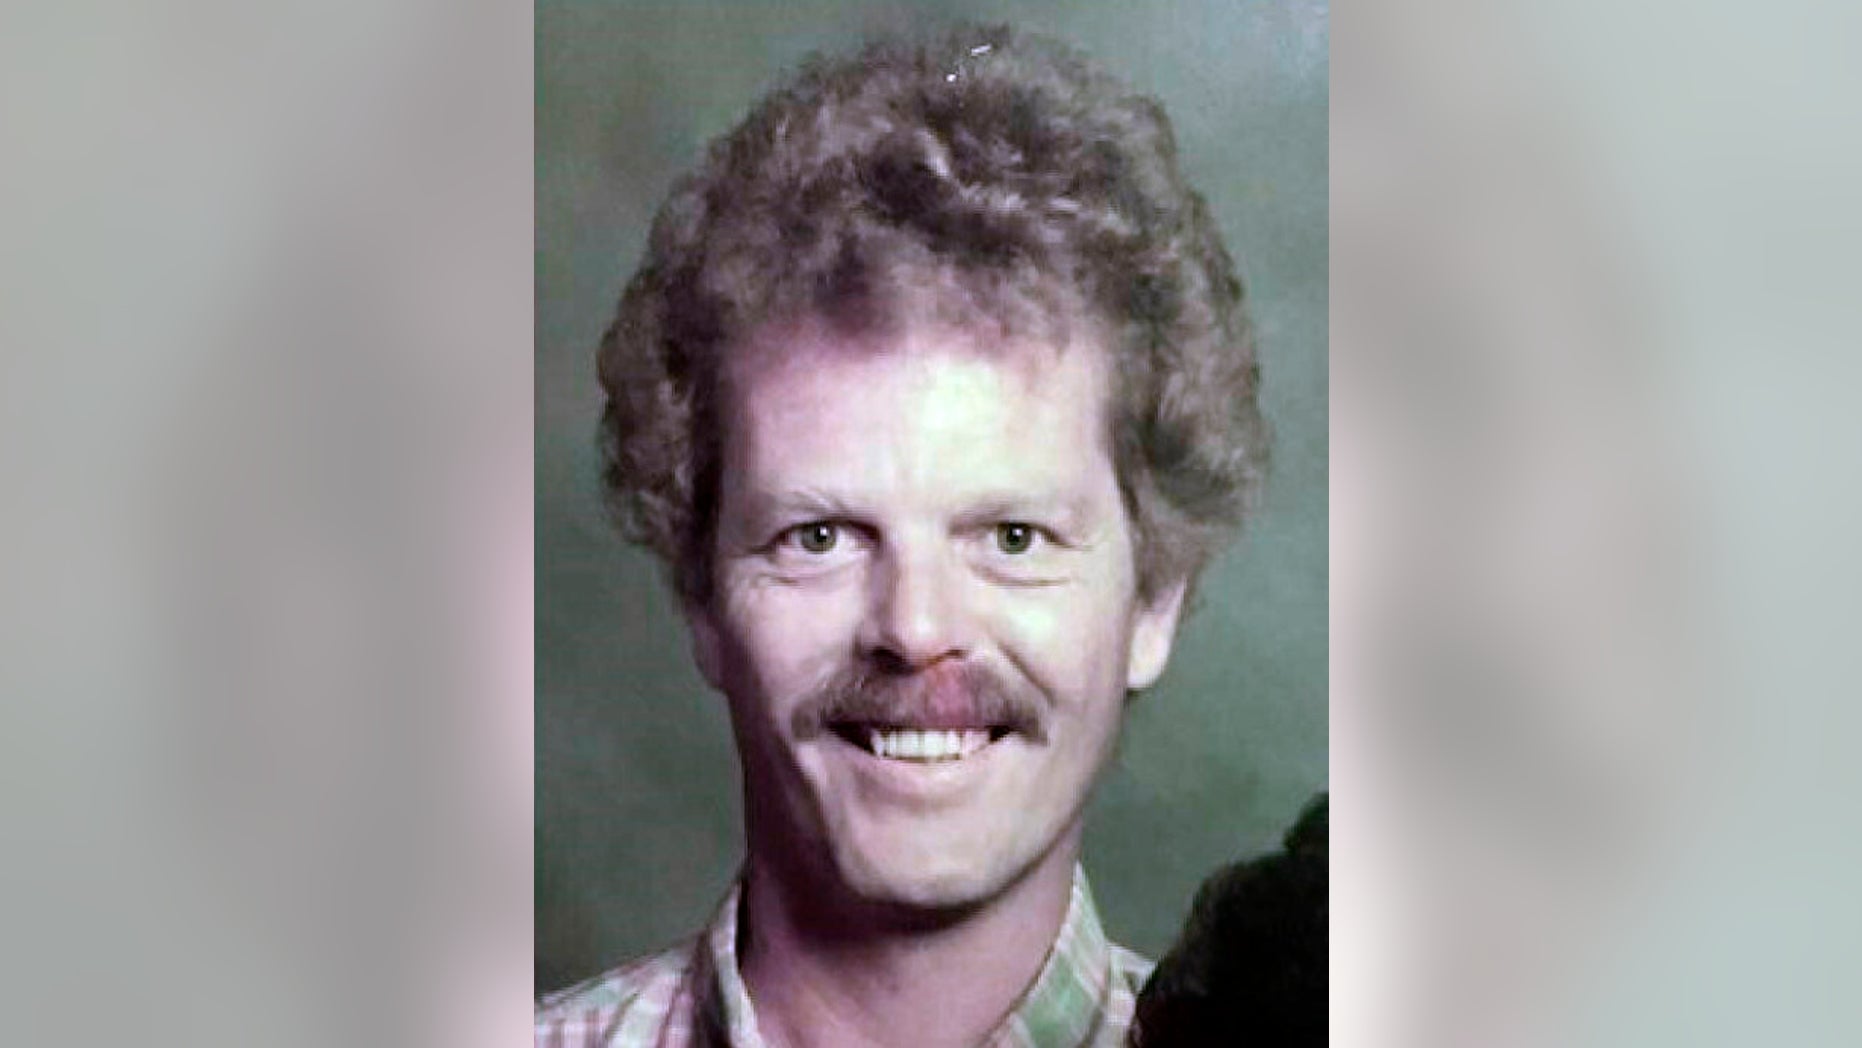 This undated photo provided by the Orange County Attorney's Office shows James Neal. California authorities have published a decades-old picture of a suspect in the murder of an eleven-year-old girl in 1973 in hopes of jogging in memory of any witness potential. Orange County officials said on Thursday, Feb. 21, 2019, that the photo could represent James Neal's appearance around the time Linda O'Keefe was murdered. James Neal, a Colorado man arrested after being tied by DNA to the murder of an 11-year-old California girl in 1973, has not yet decided to go to court. he was going to fight extradition. (Orange County Attorney's Office via AP)